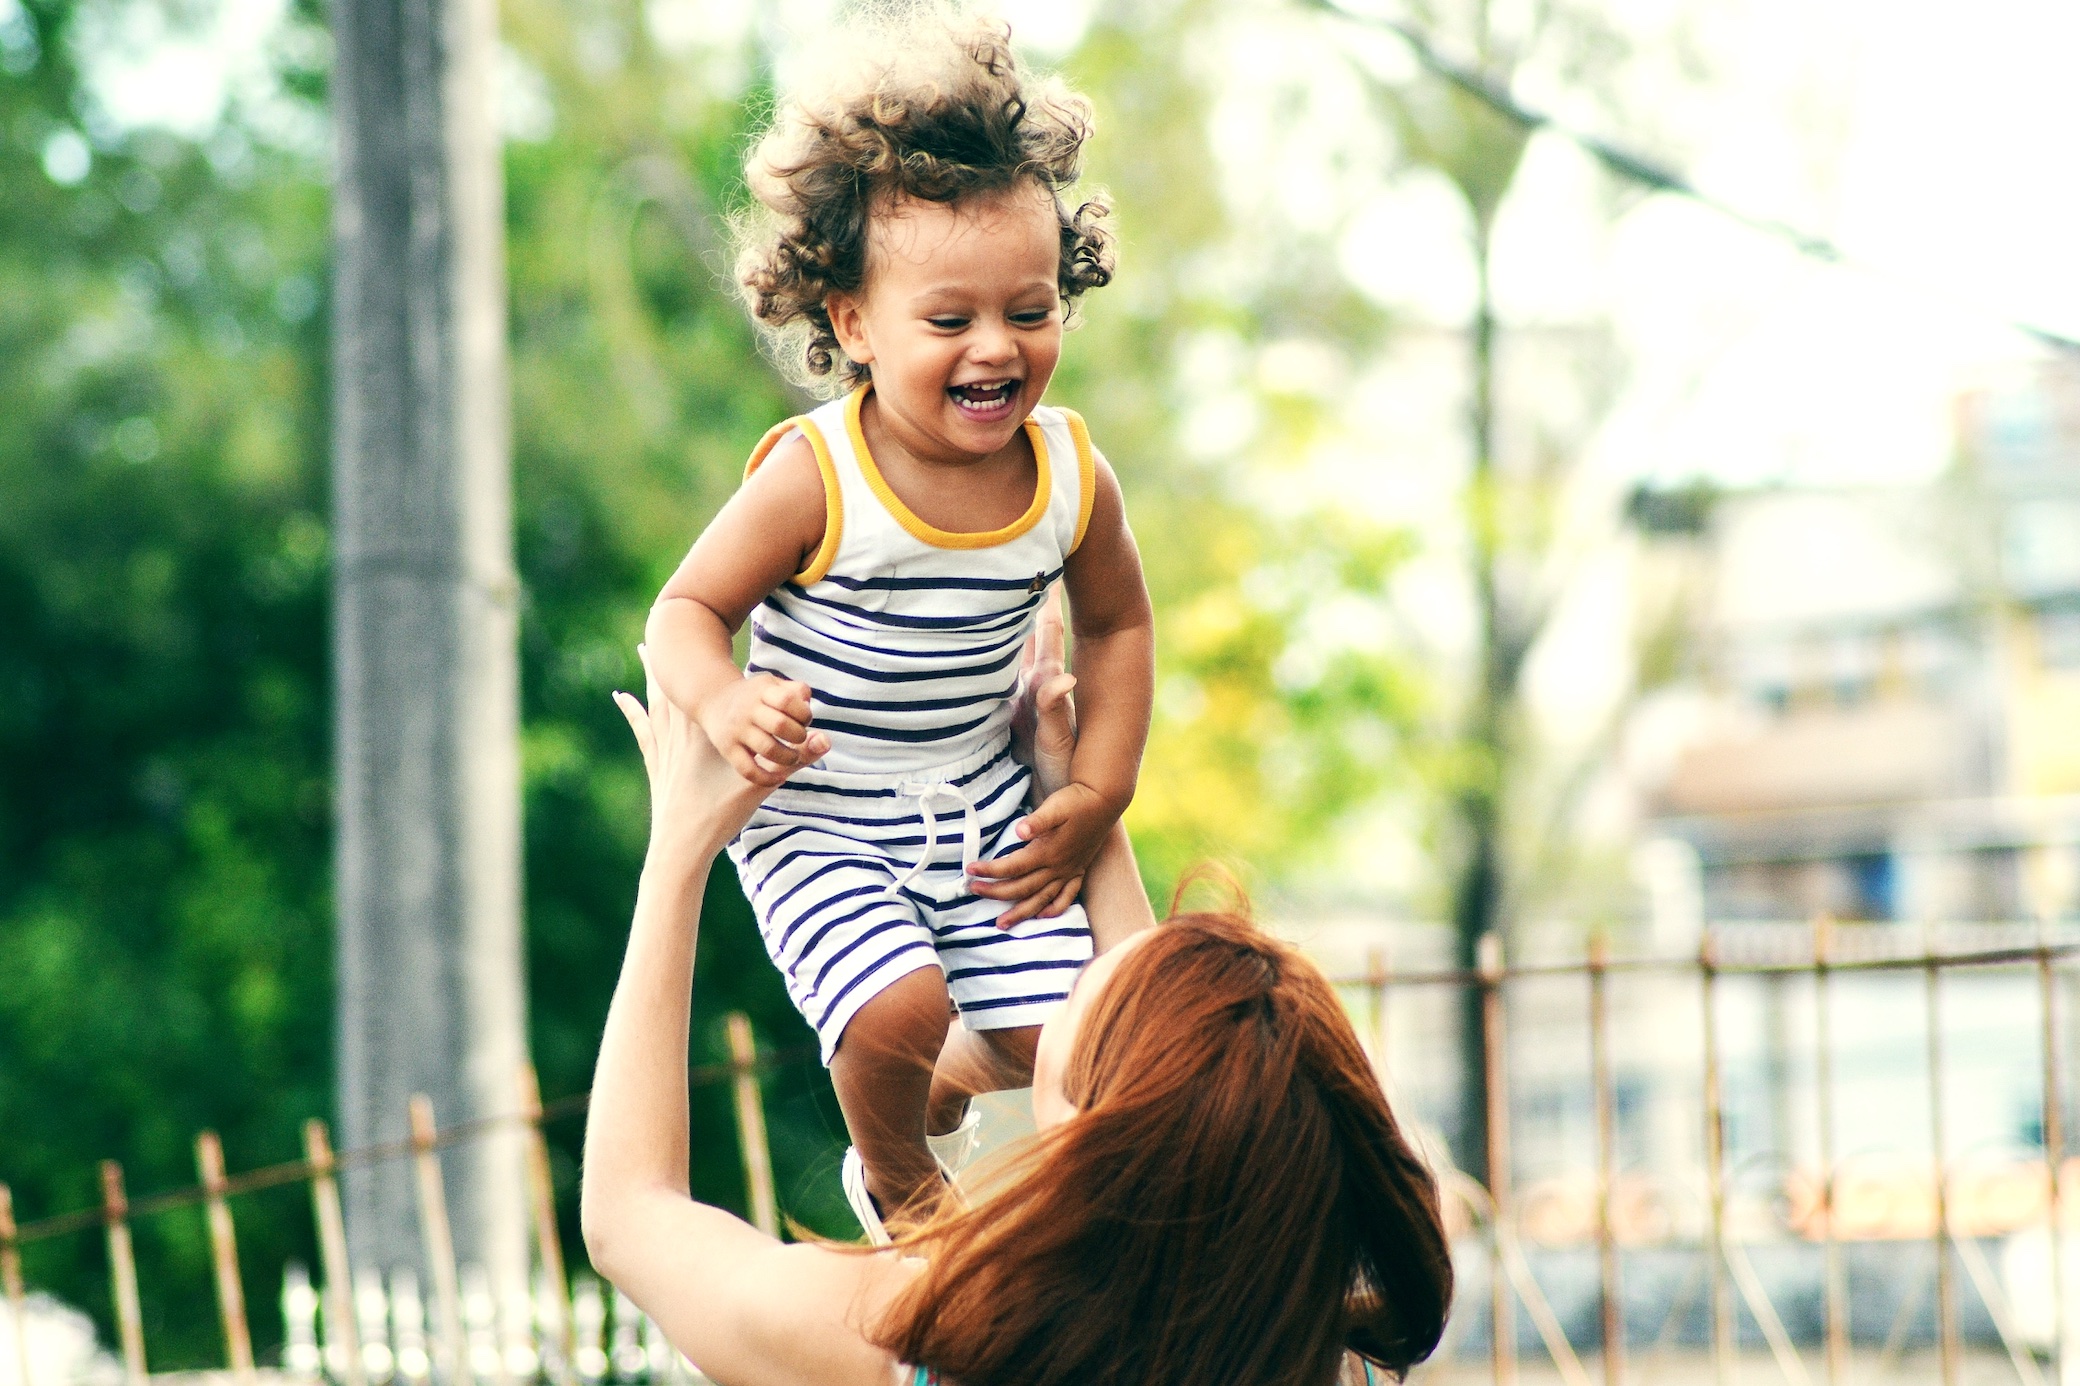 Woman tossing happy child in the air; image by Thiago Cerqueira, via Unsplash.com.